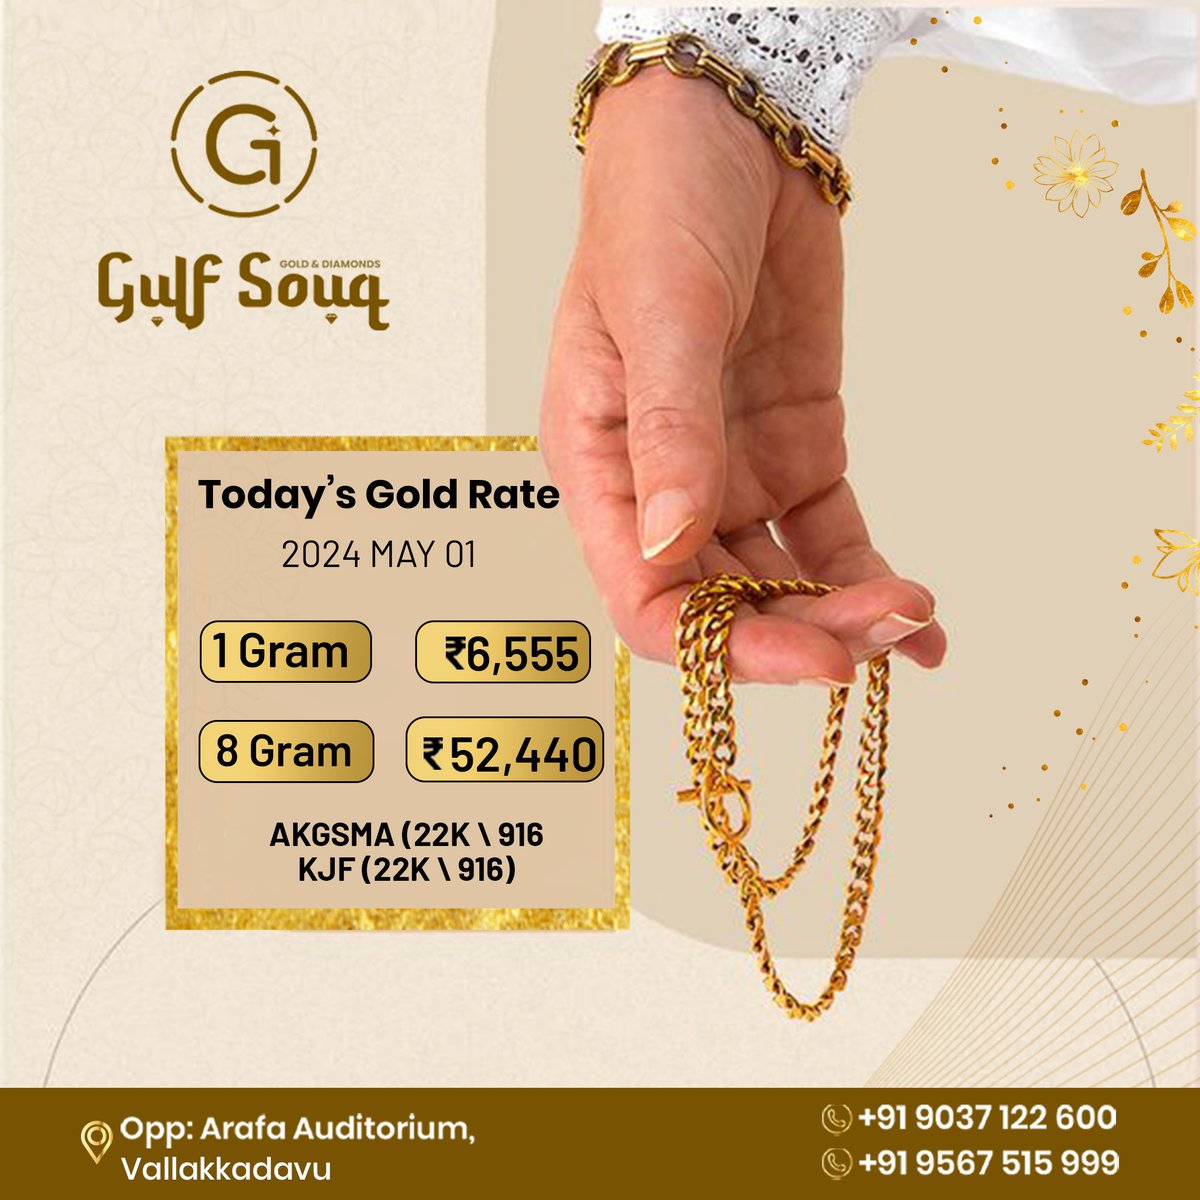 Shine and sparkle with our exclusive line of jewelry👑✨
Today's Gold Rate:
✨1 Gram: 6,555/-
✨8 Gram: 52,440/-
#GulfSouq #JewelleryWholesaler #WholesaleJewellery
#LuxuryFashion #jewellery
#jewelry #fashion #earrings #necklace #handmade
#gold #accessories #silver #jewellerydesig